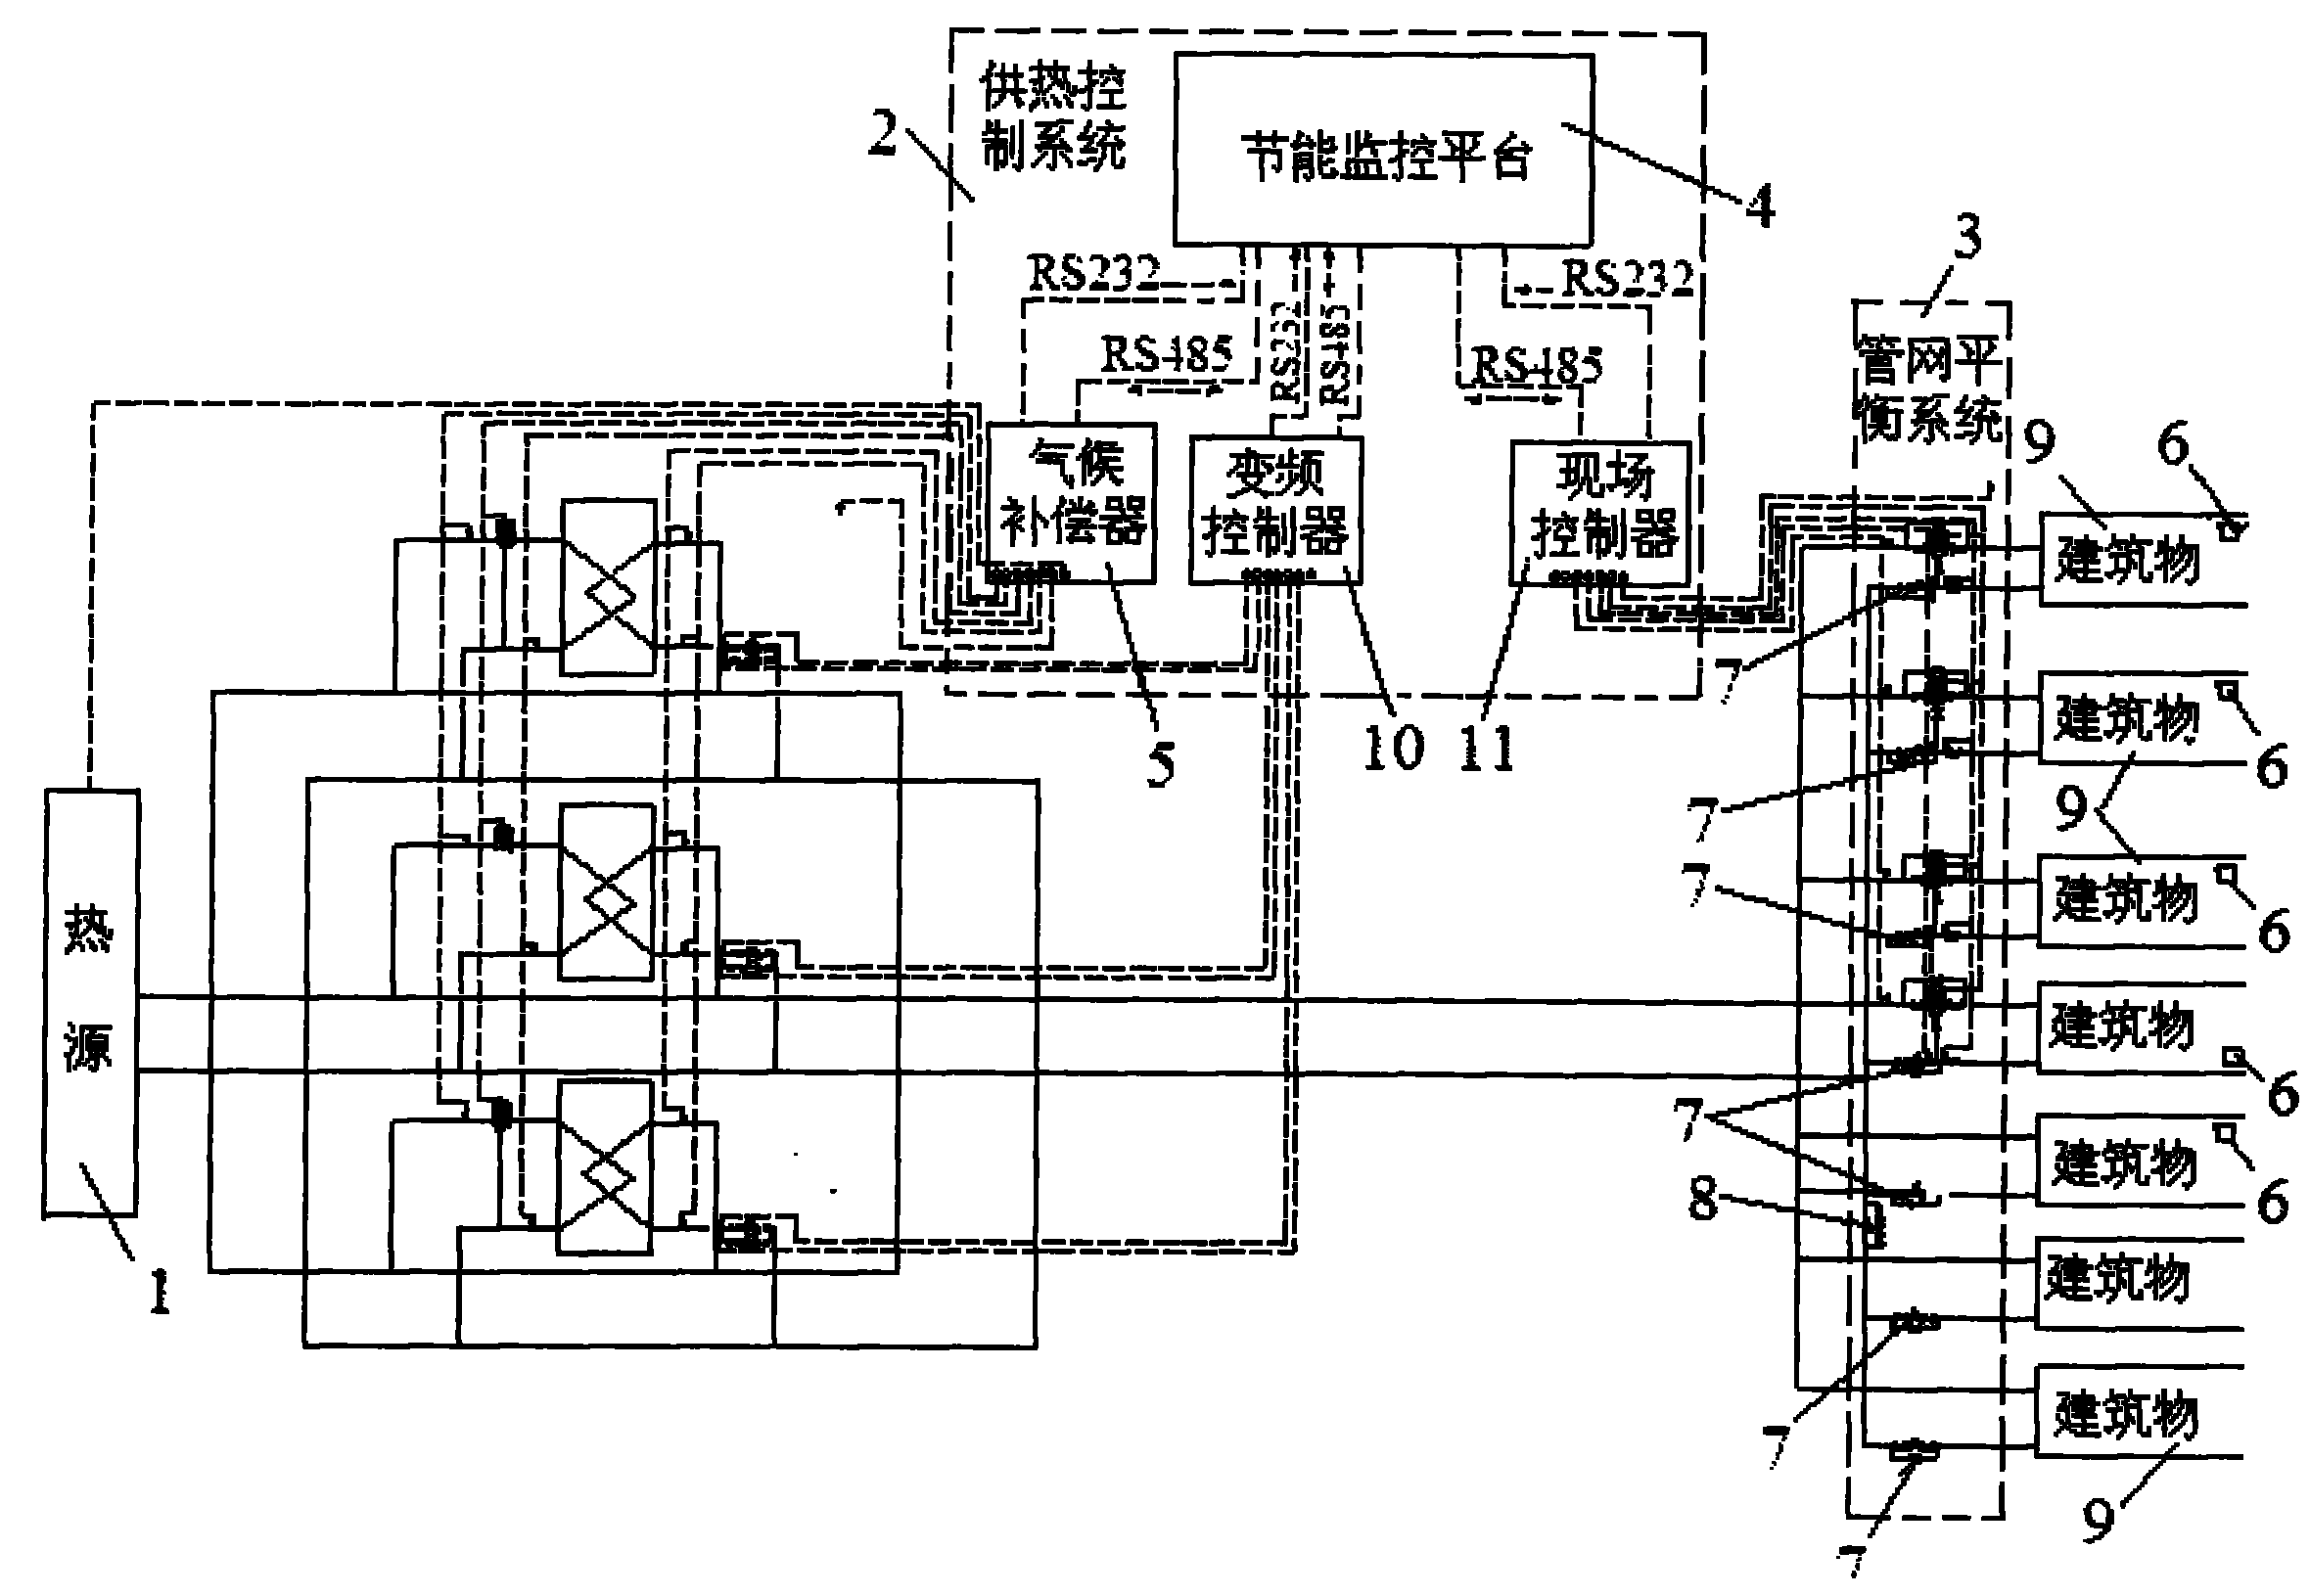 Integrated heat-supply and energy-saving system